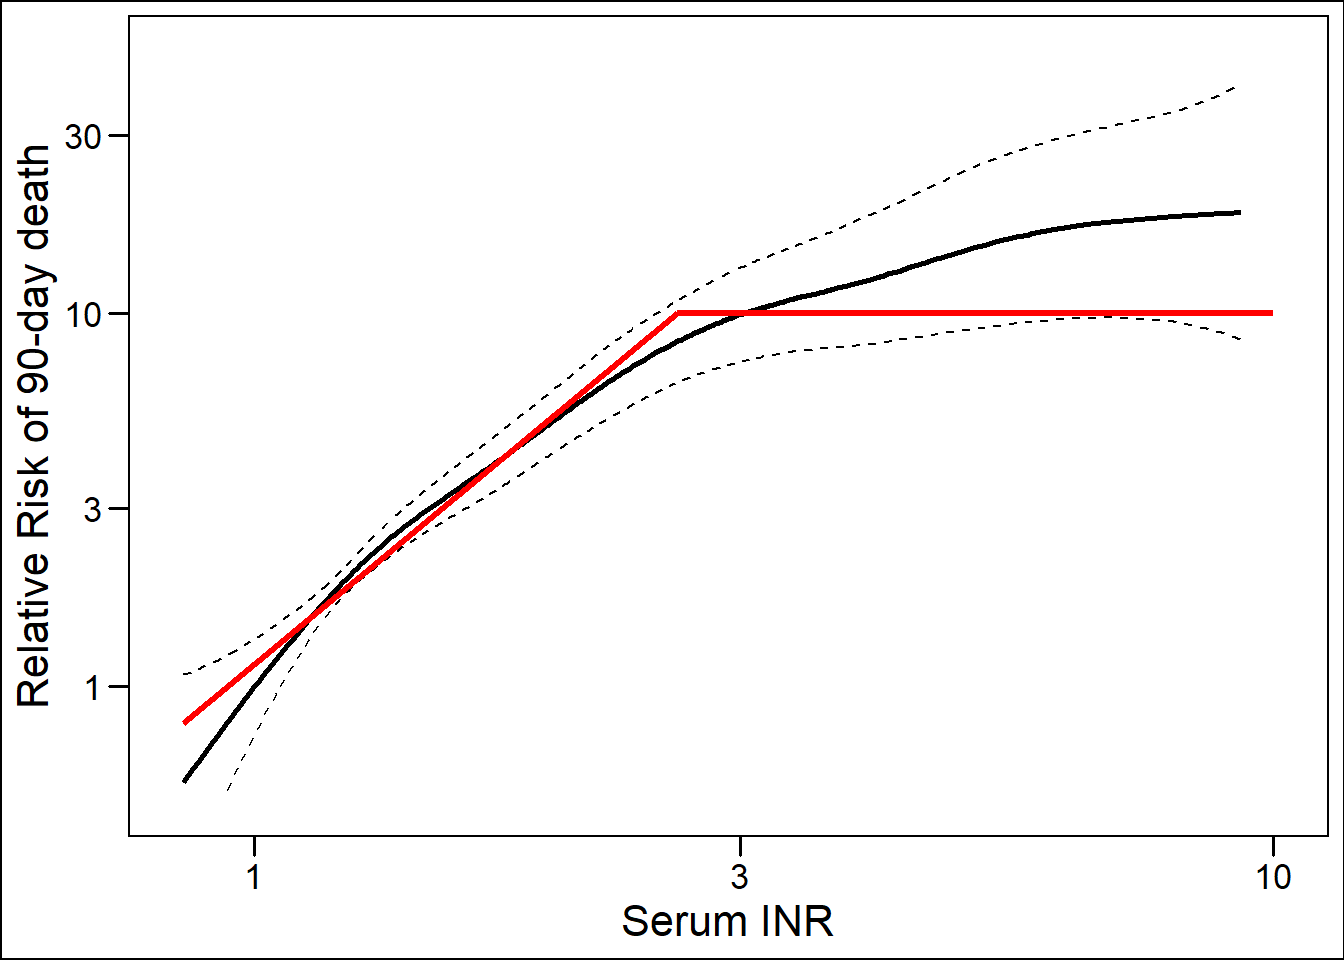 For each parameter, the diagonal line represent the coefficient (slope of the diagonal) and lower and upper boundaries (horizontal segments) in refit MELD